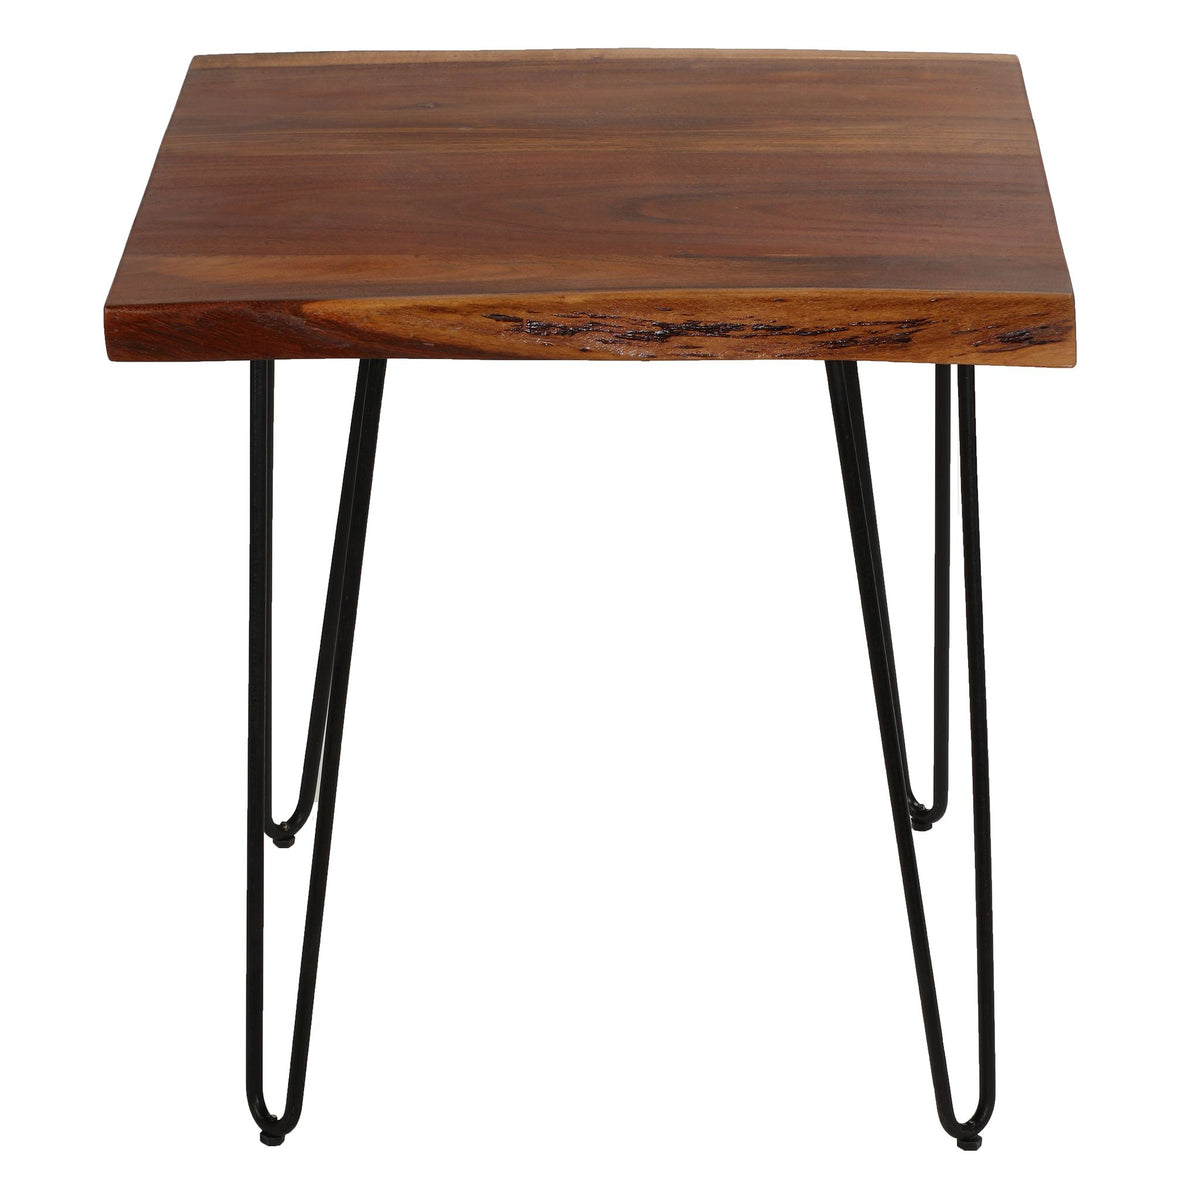 Bare Decor Nunavut Square End Table Solid Wood Live Top with Black Metal Hairpin Legs, 24x24x24